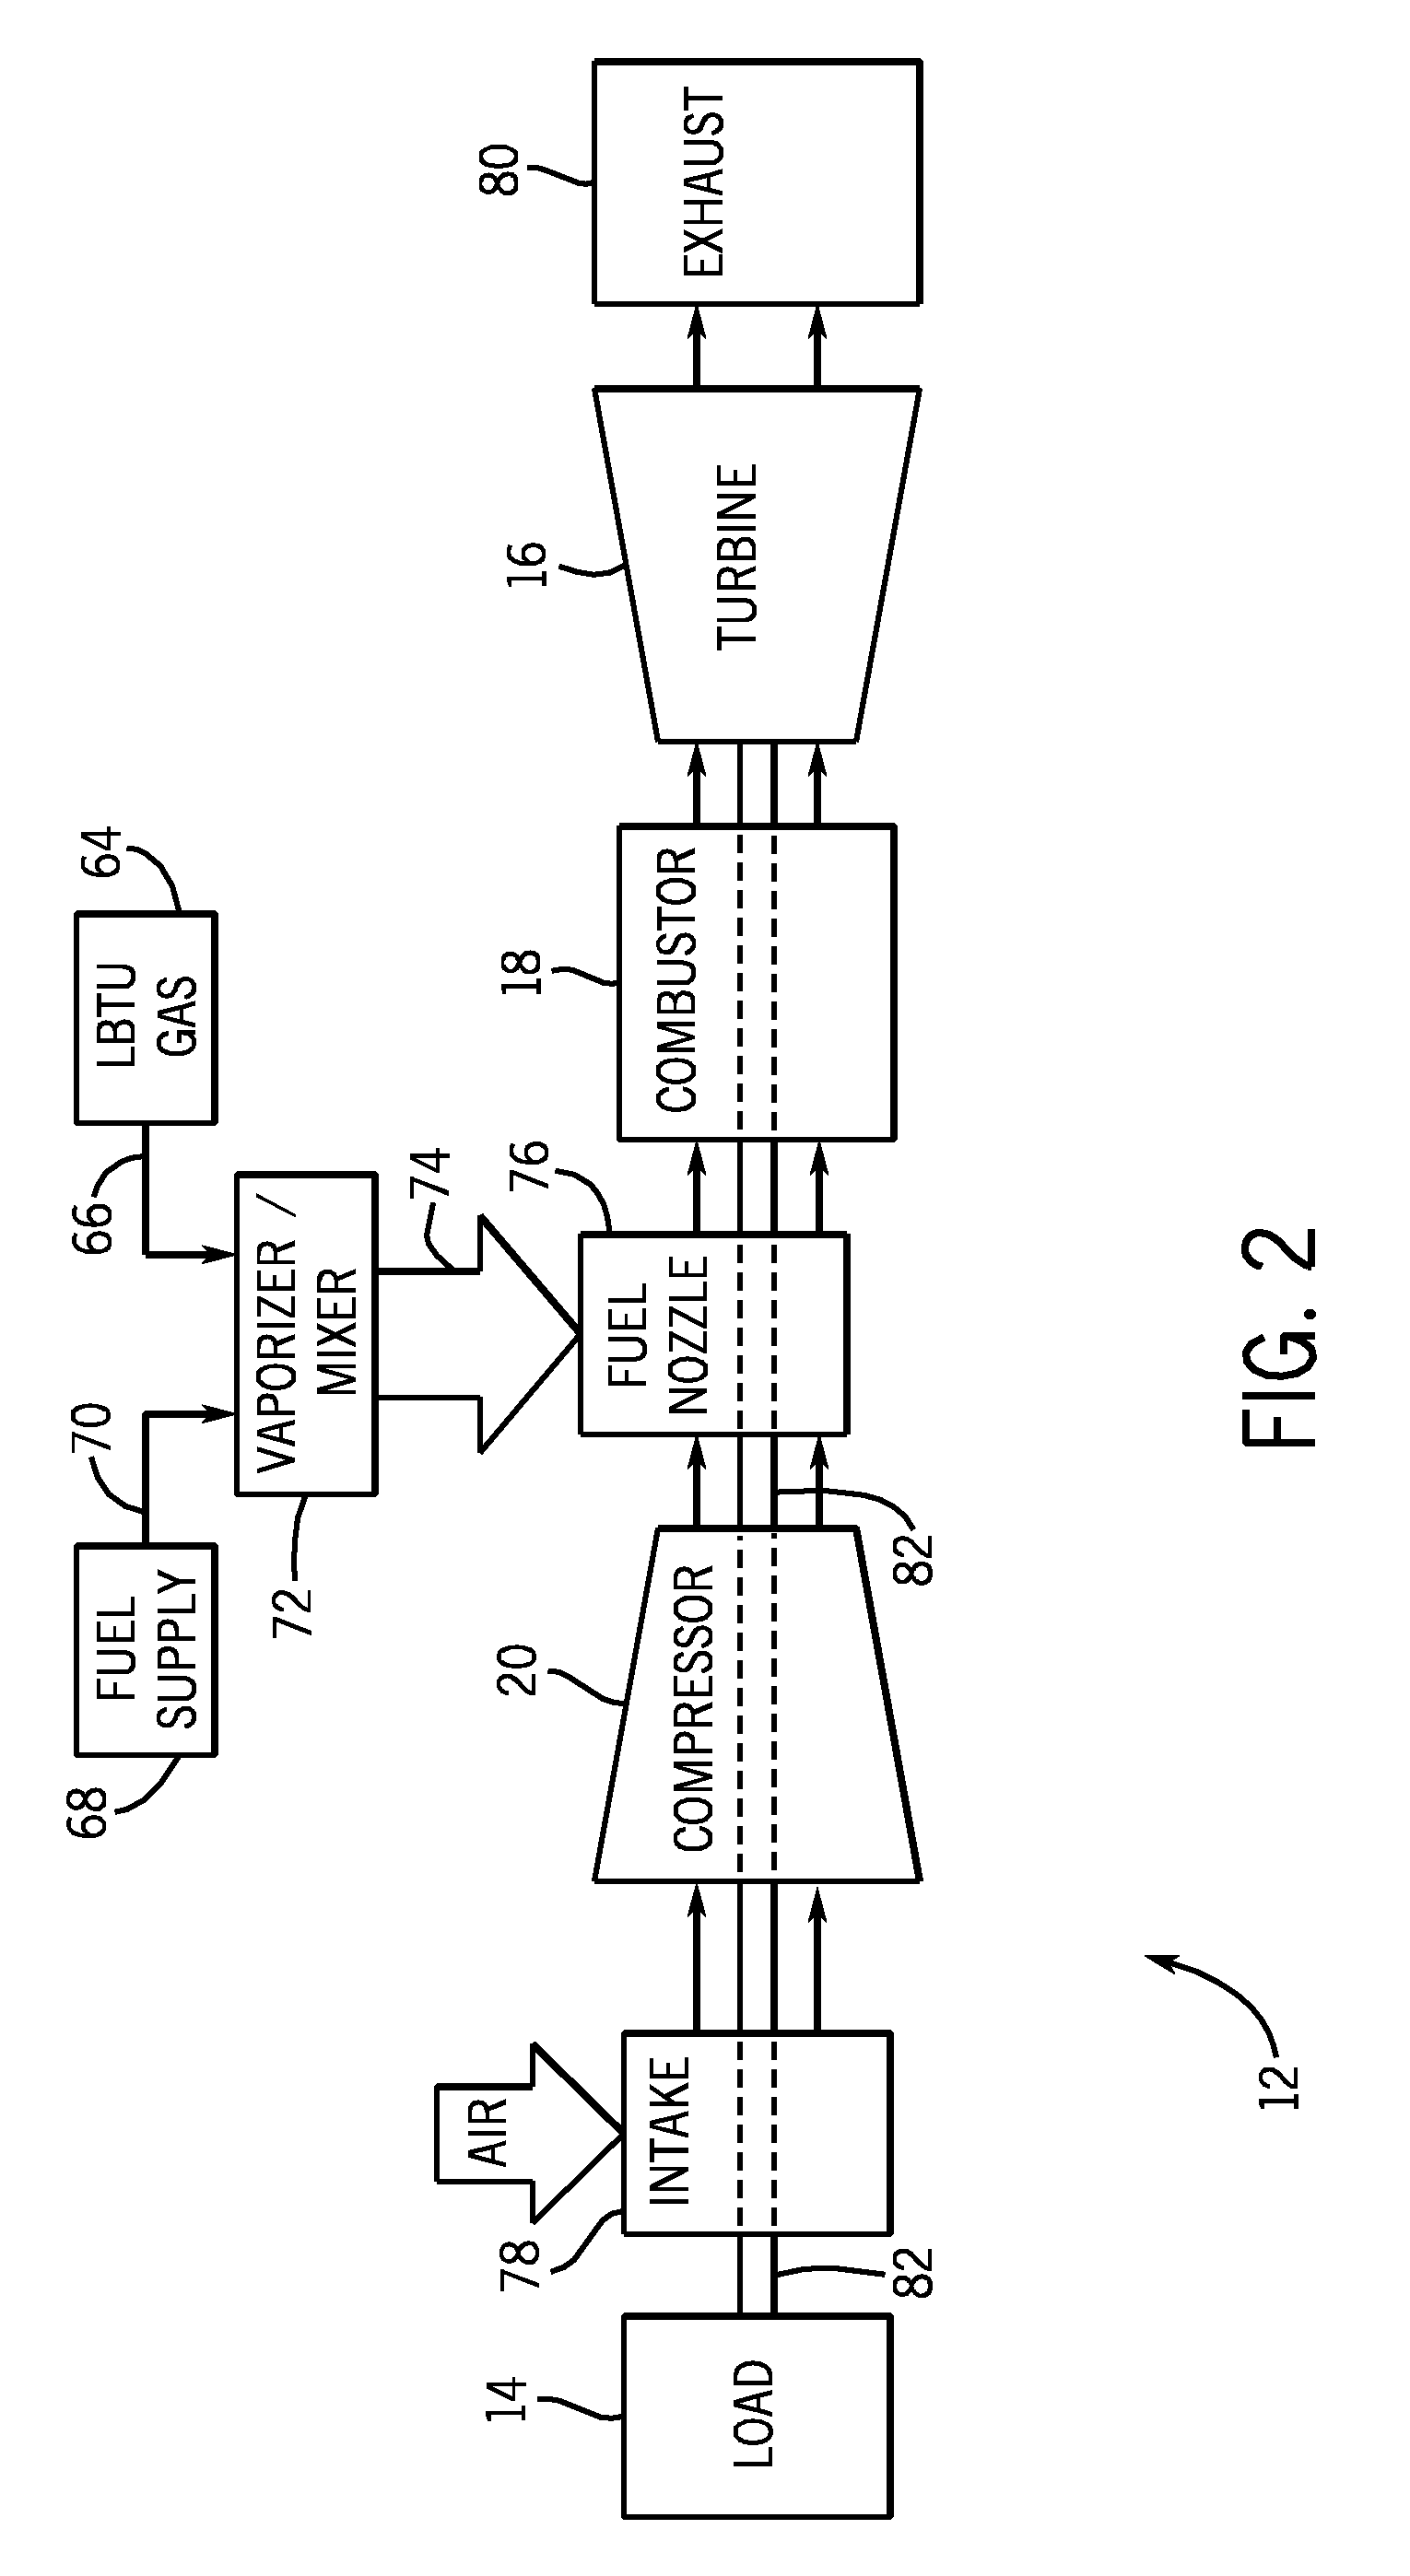 Method and apparatus for controlling a heating value of a low energy fuel